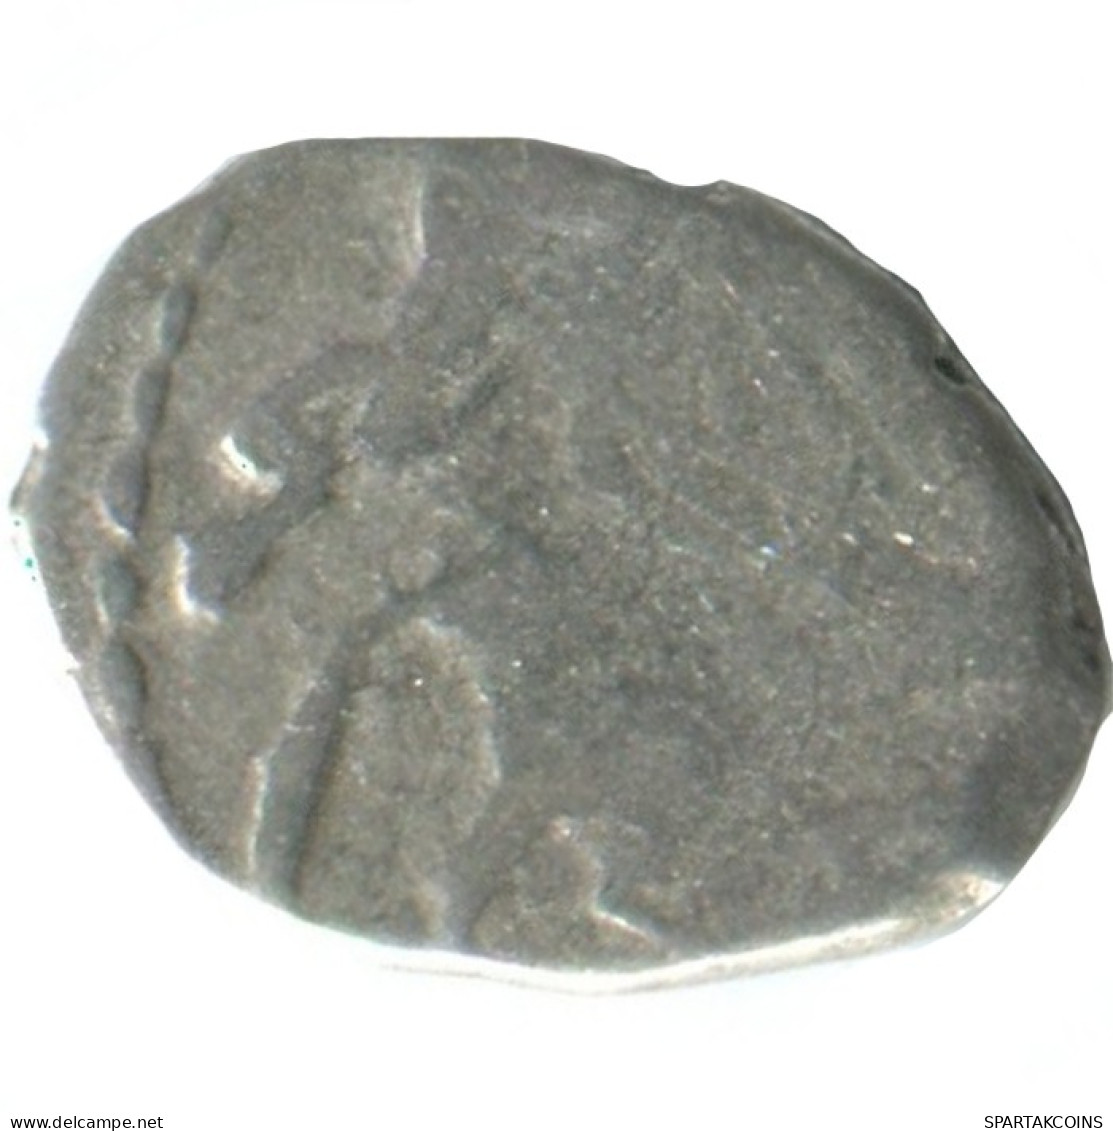 RUSSIE RUSSIA 1706 KOPECK PETER I OLD Mint MOSCOW ARGENT 0.3g/8mm #AB618.10.F.A - Russia